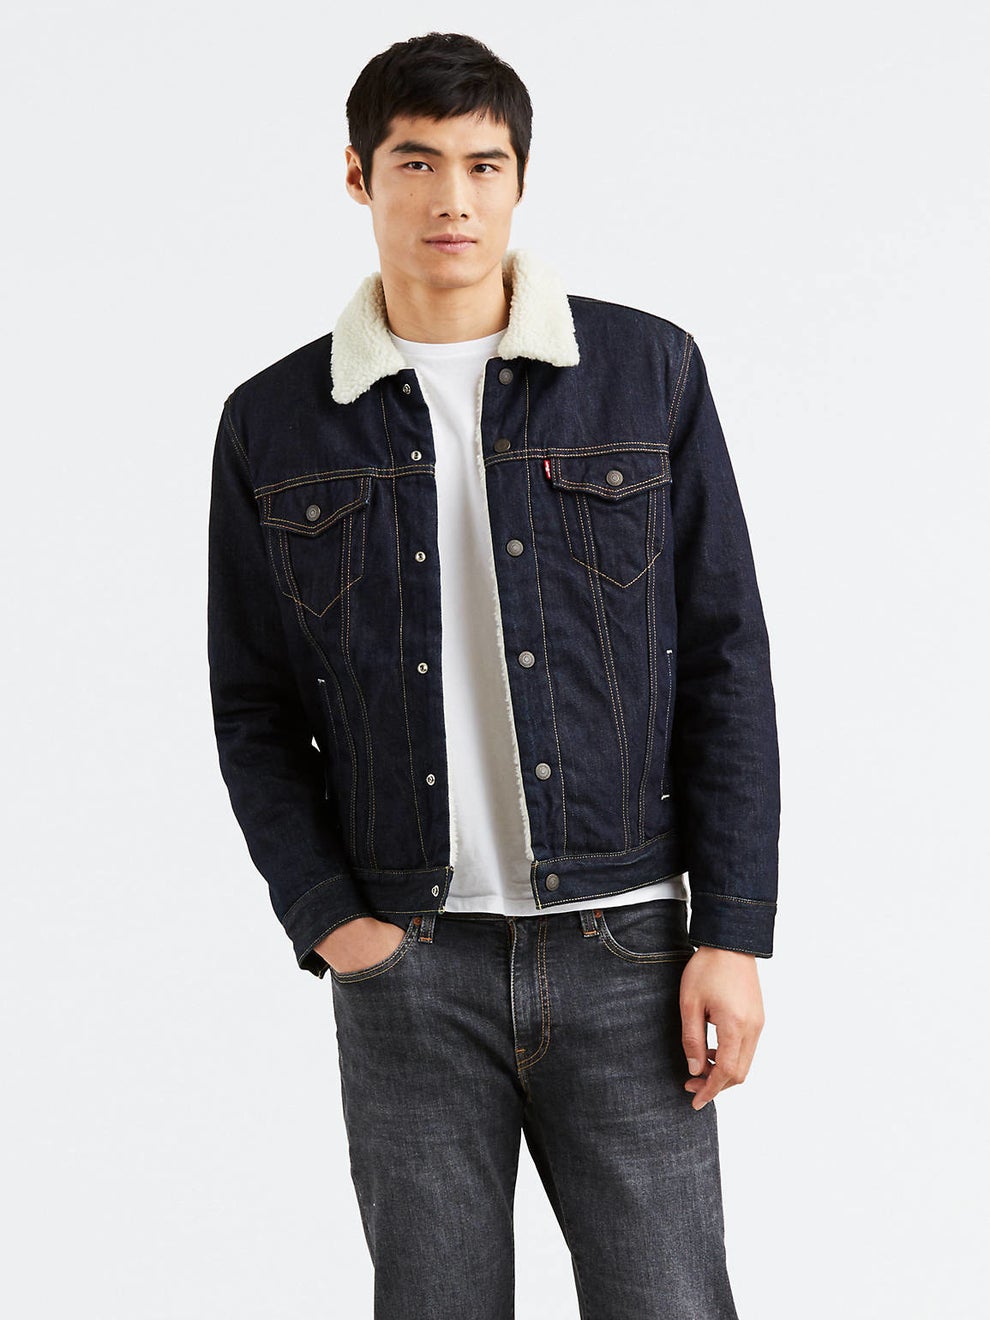 15 Things From Levi's Worth Your Money